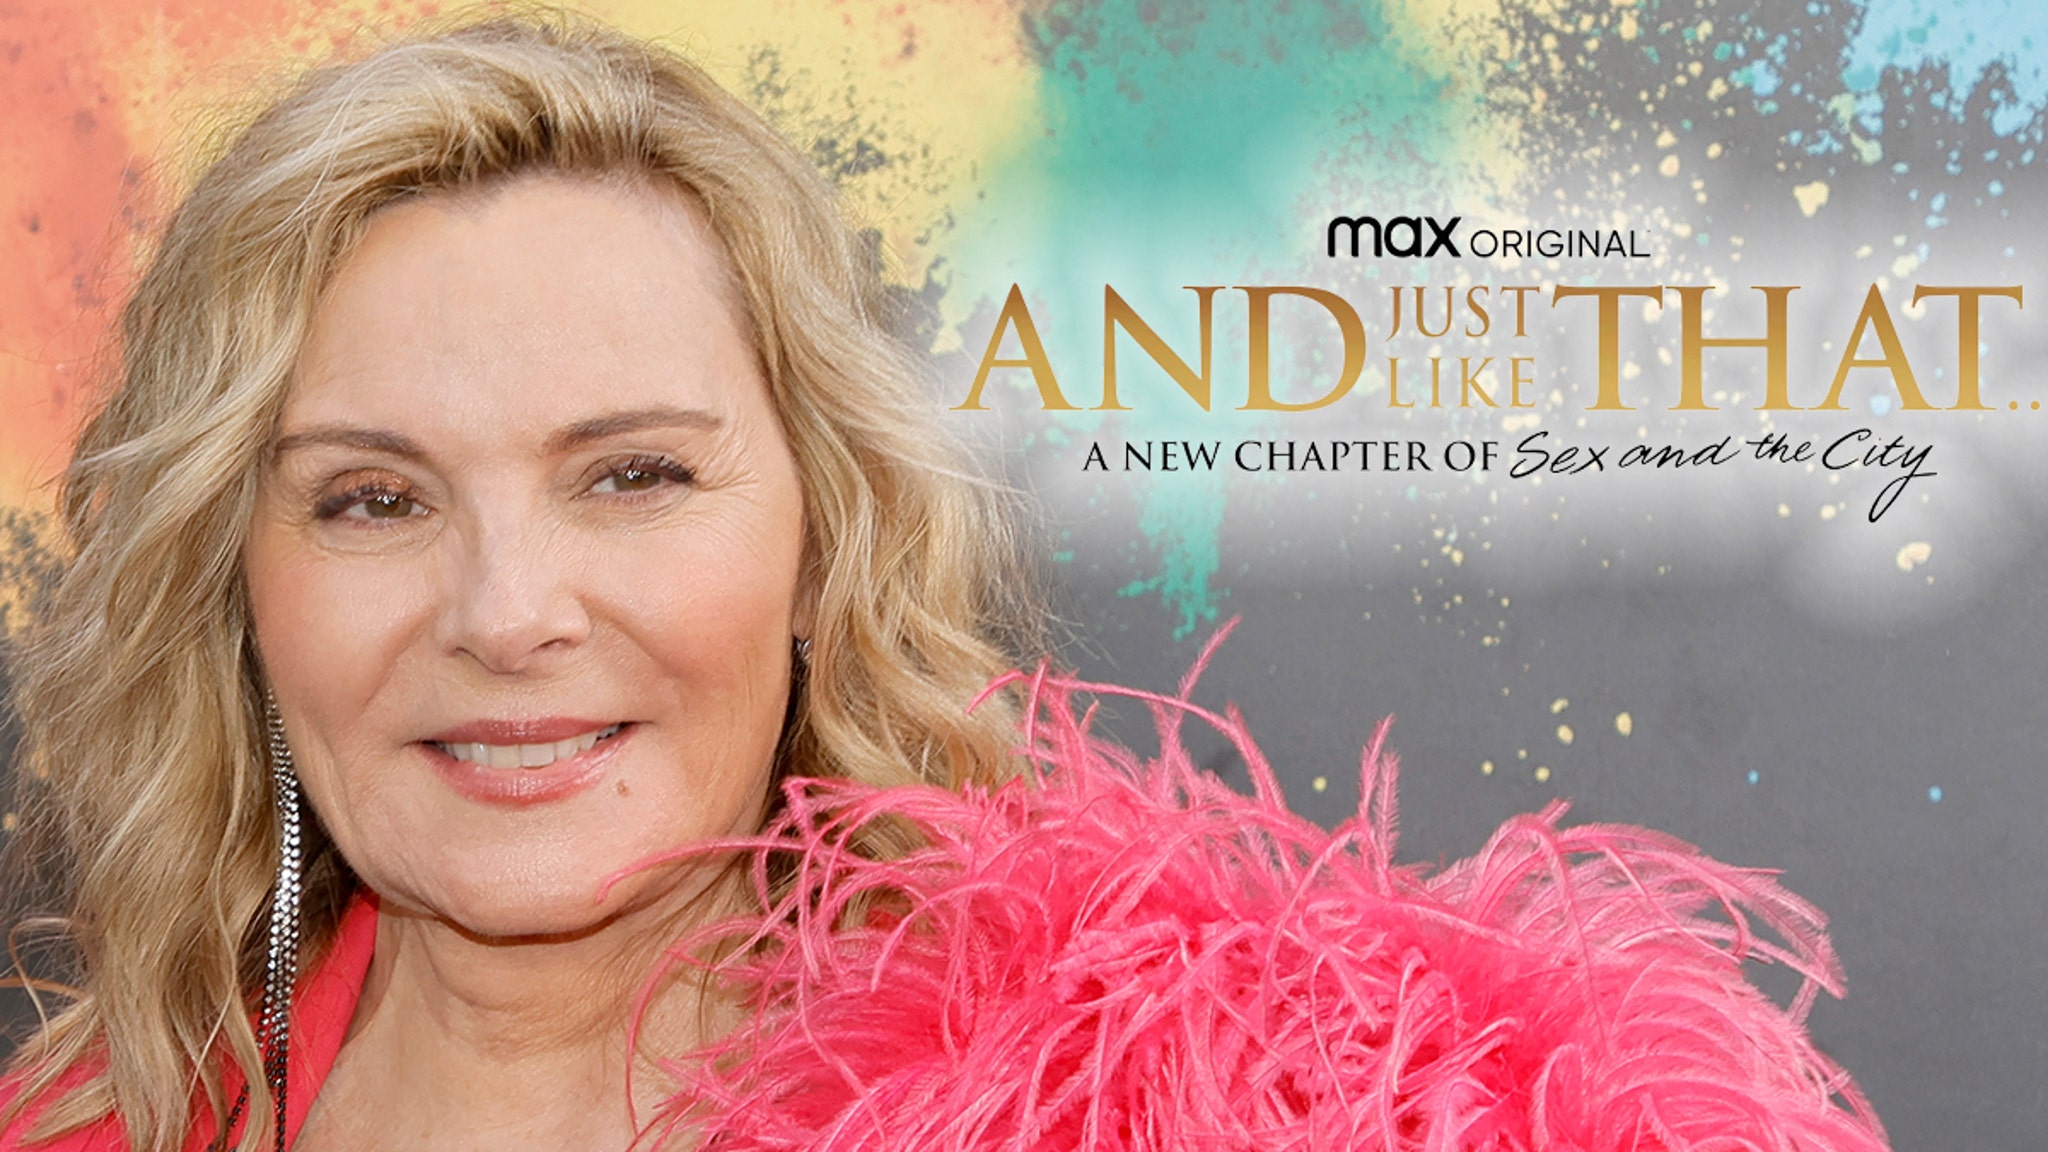 Kim Cattrall returning as Samantha Jones for ‘And Just Like That’